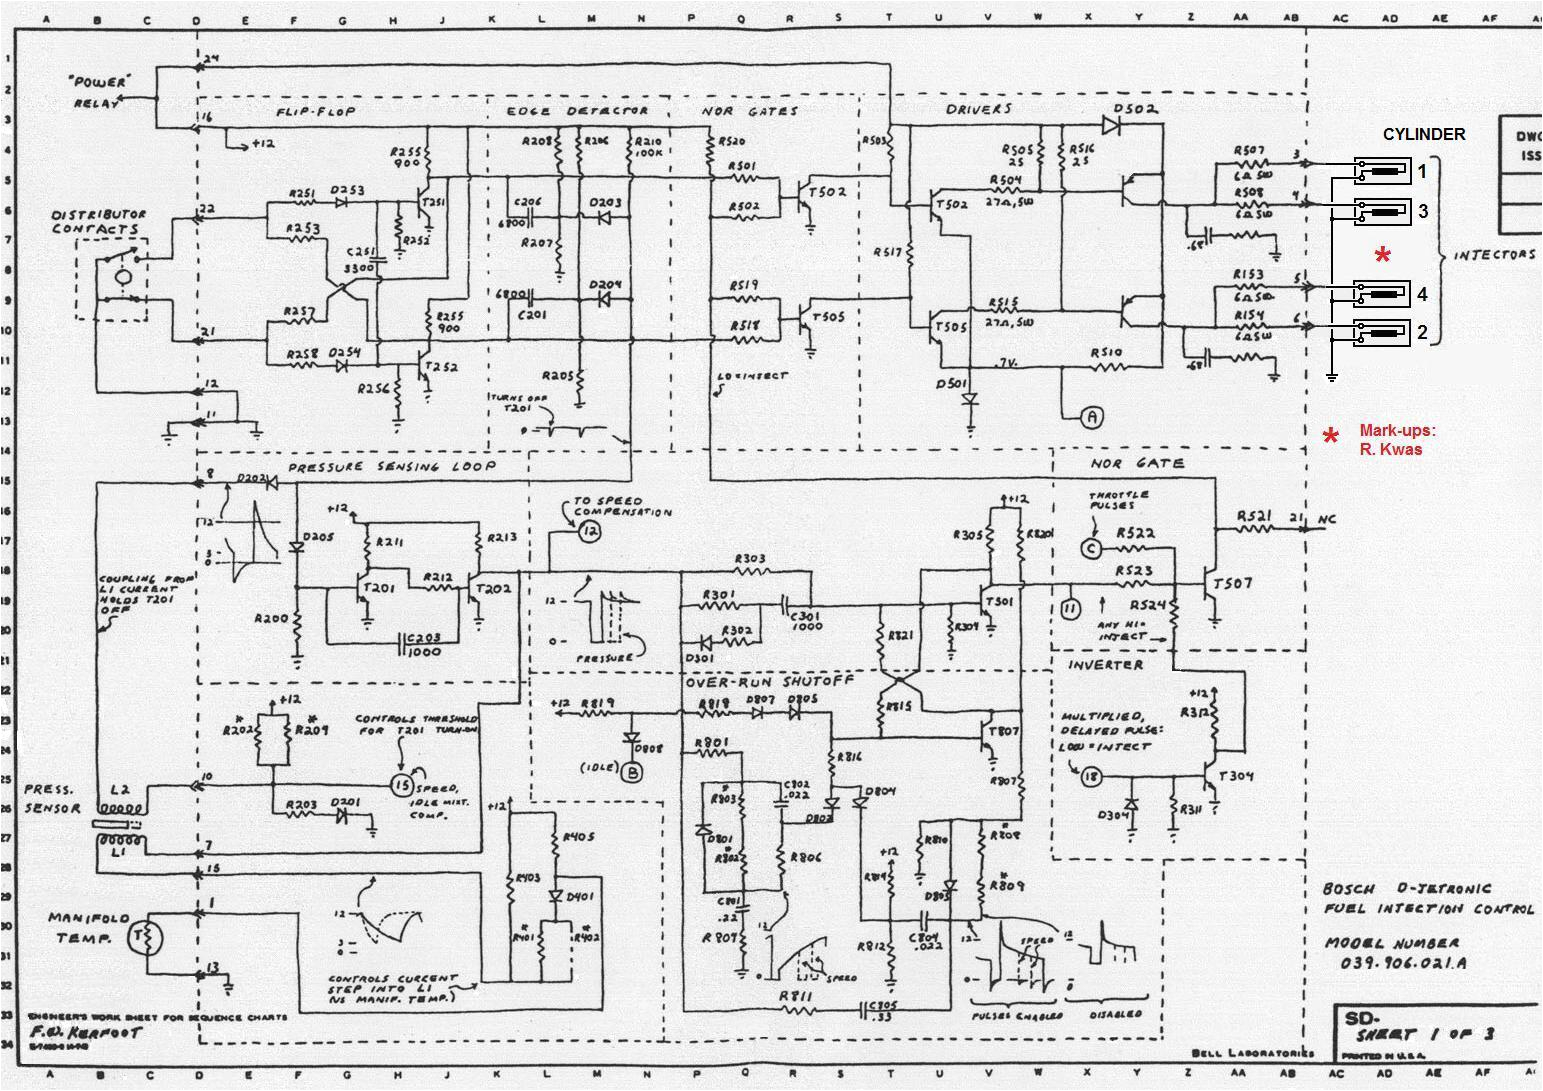 sheet 1 timing logic tl pressure sensing loop pl over run shutoff os injection logic il switching logic sl and output drivers d1 d2